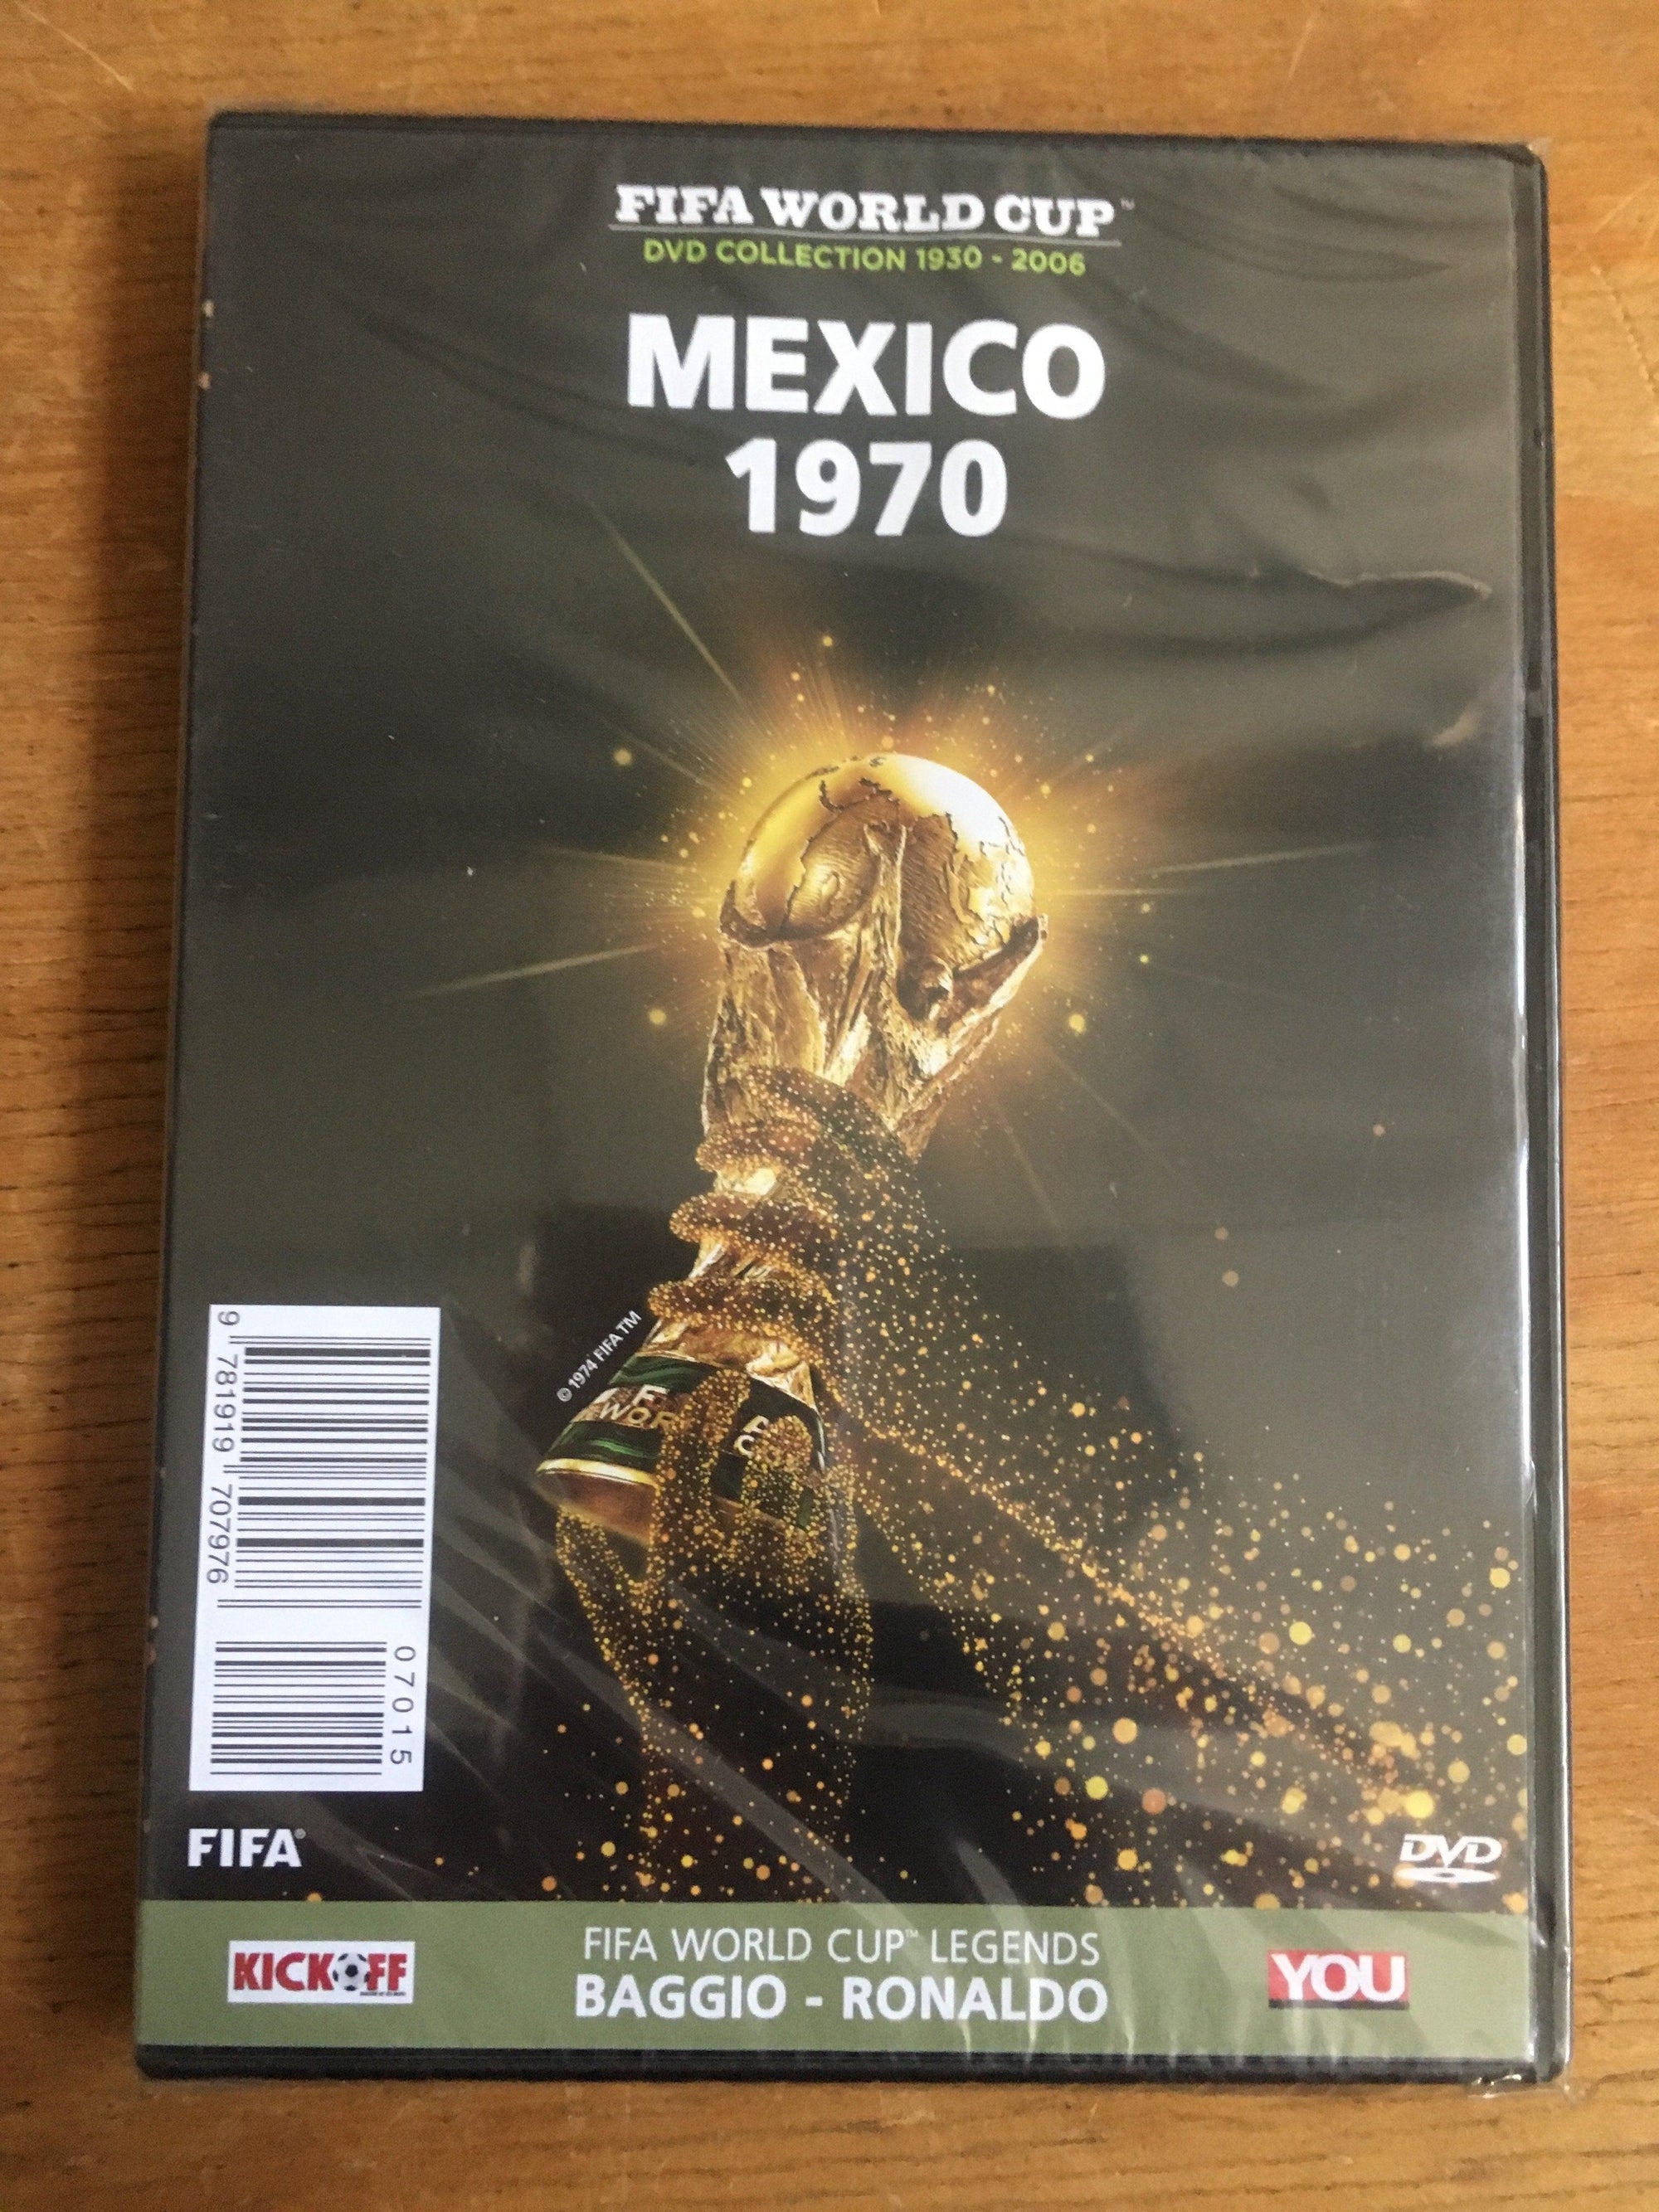 Fifa World Cup Mexico 1970 (DVD) - 2ndhandwarehouse.com